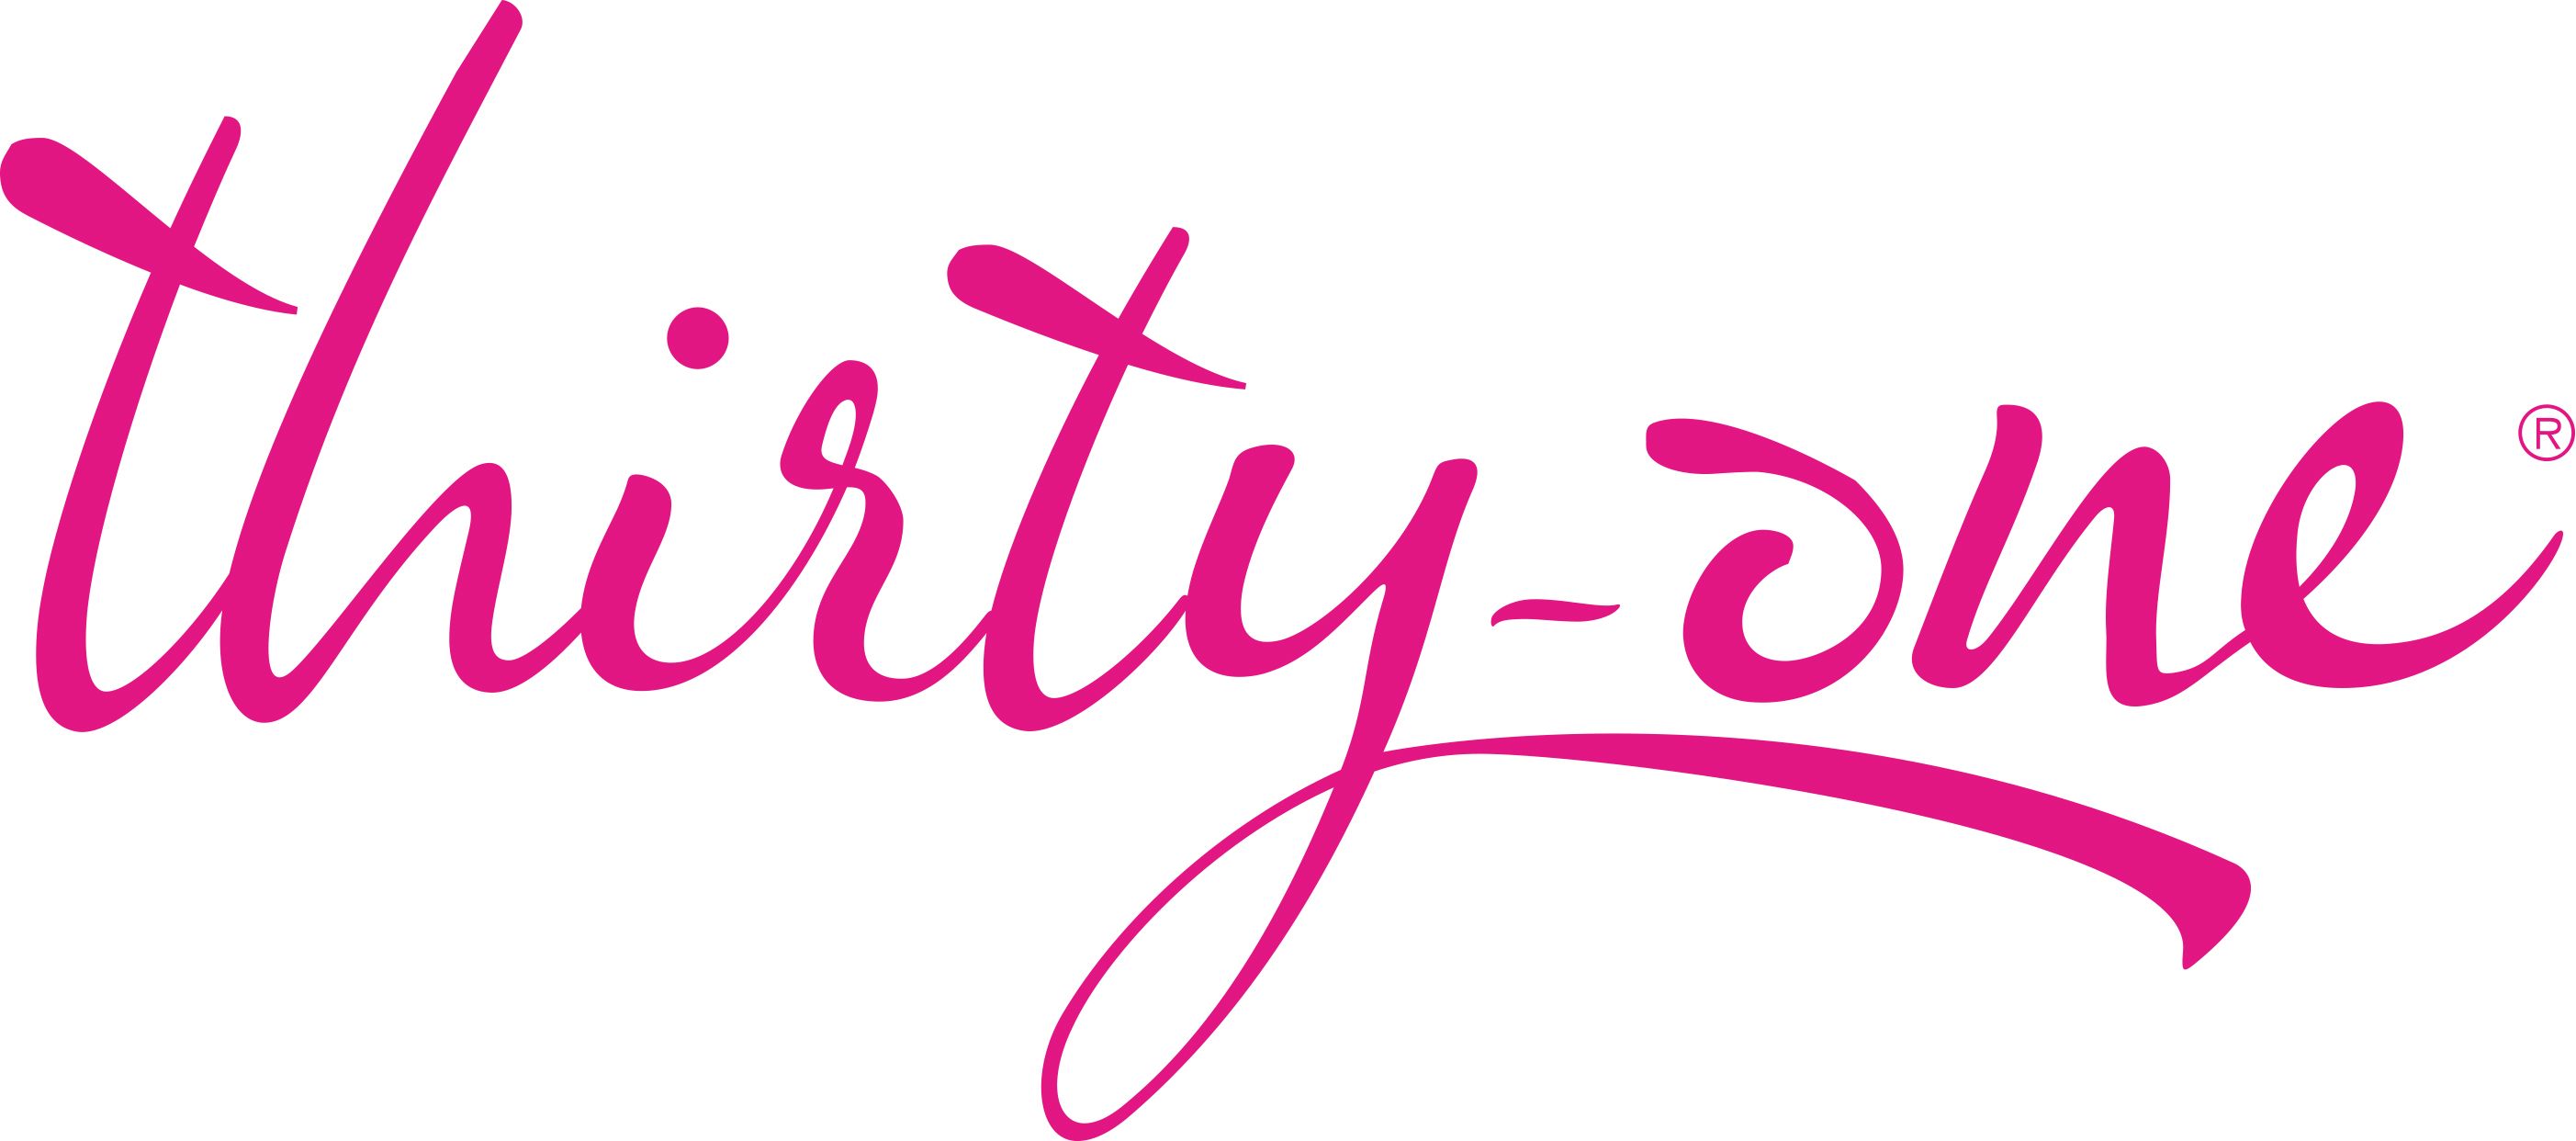 Thirty-One Gifts logo